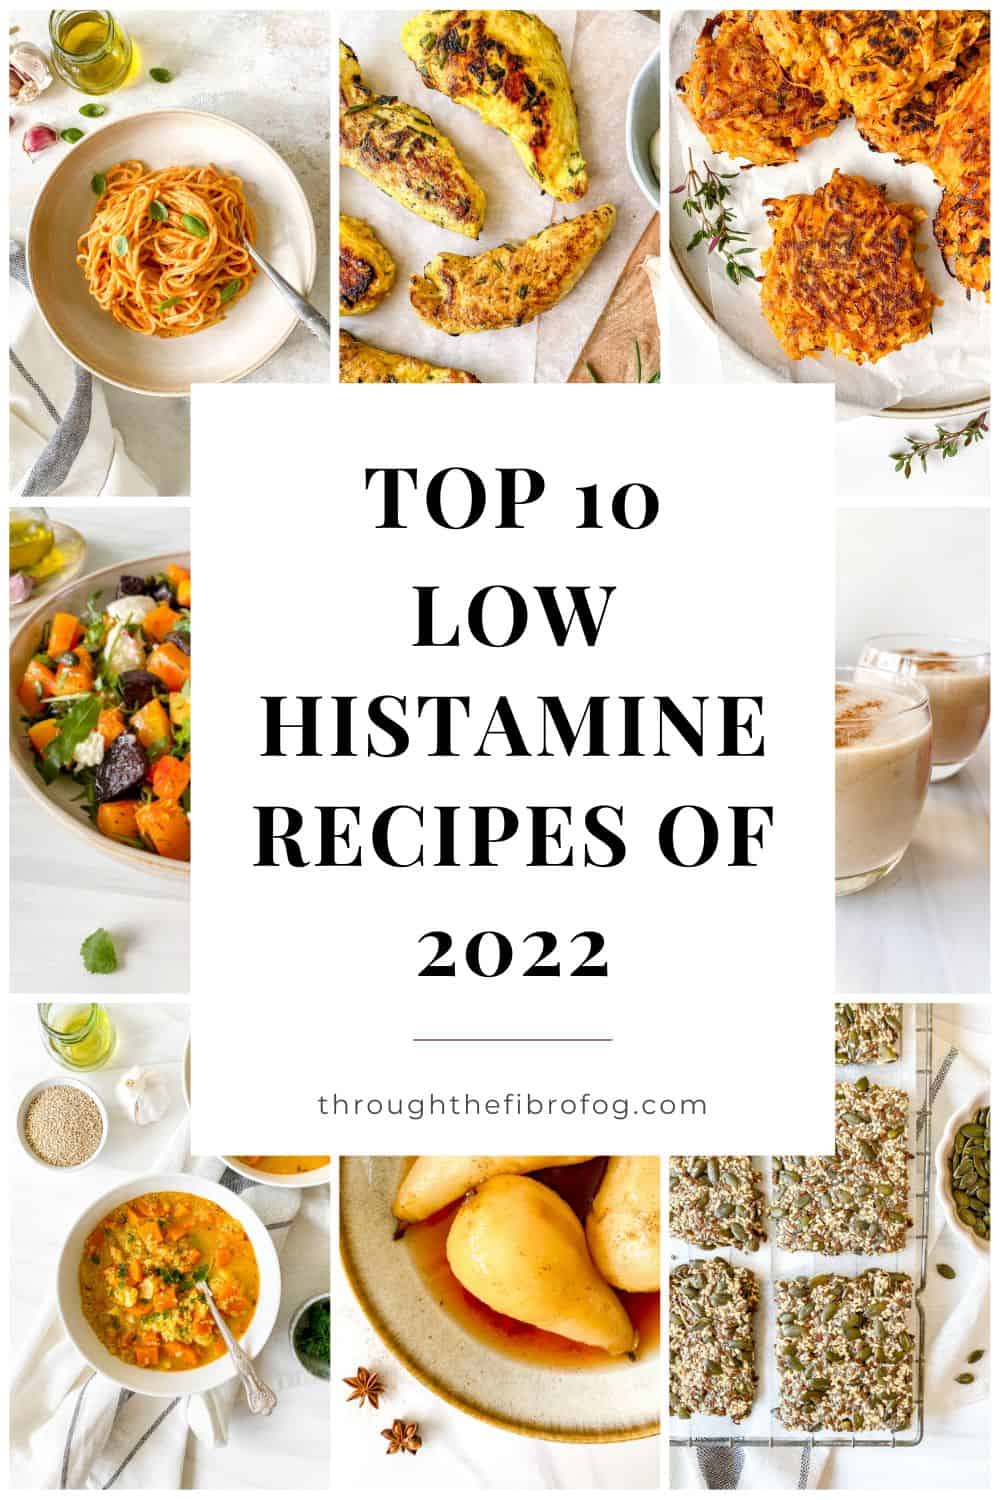 collage of salads, soups, fritters, pears, smoothies and pasta dishes with text top ten low histamine recipes of 2022.